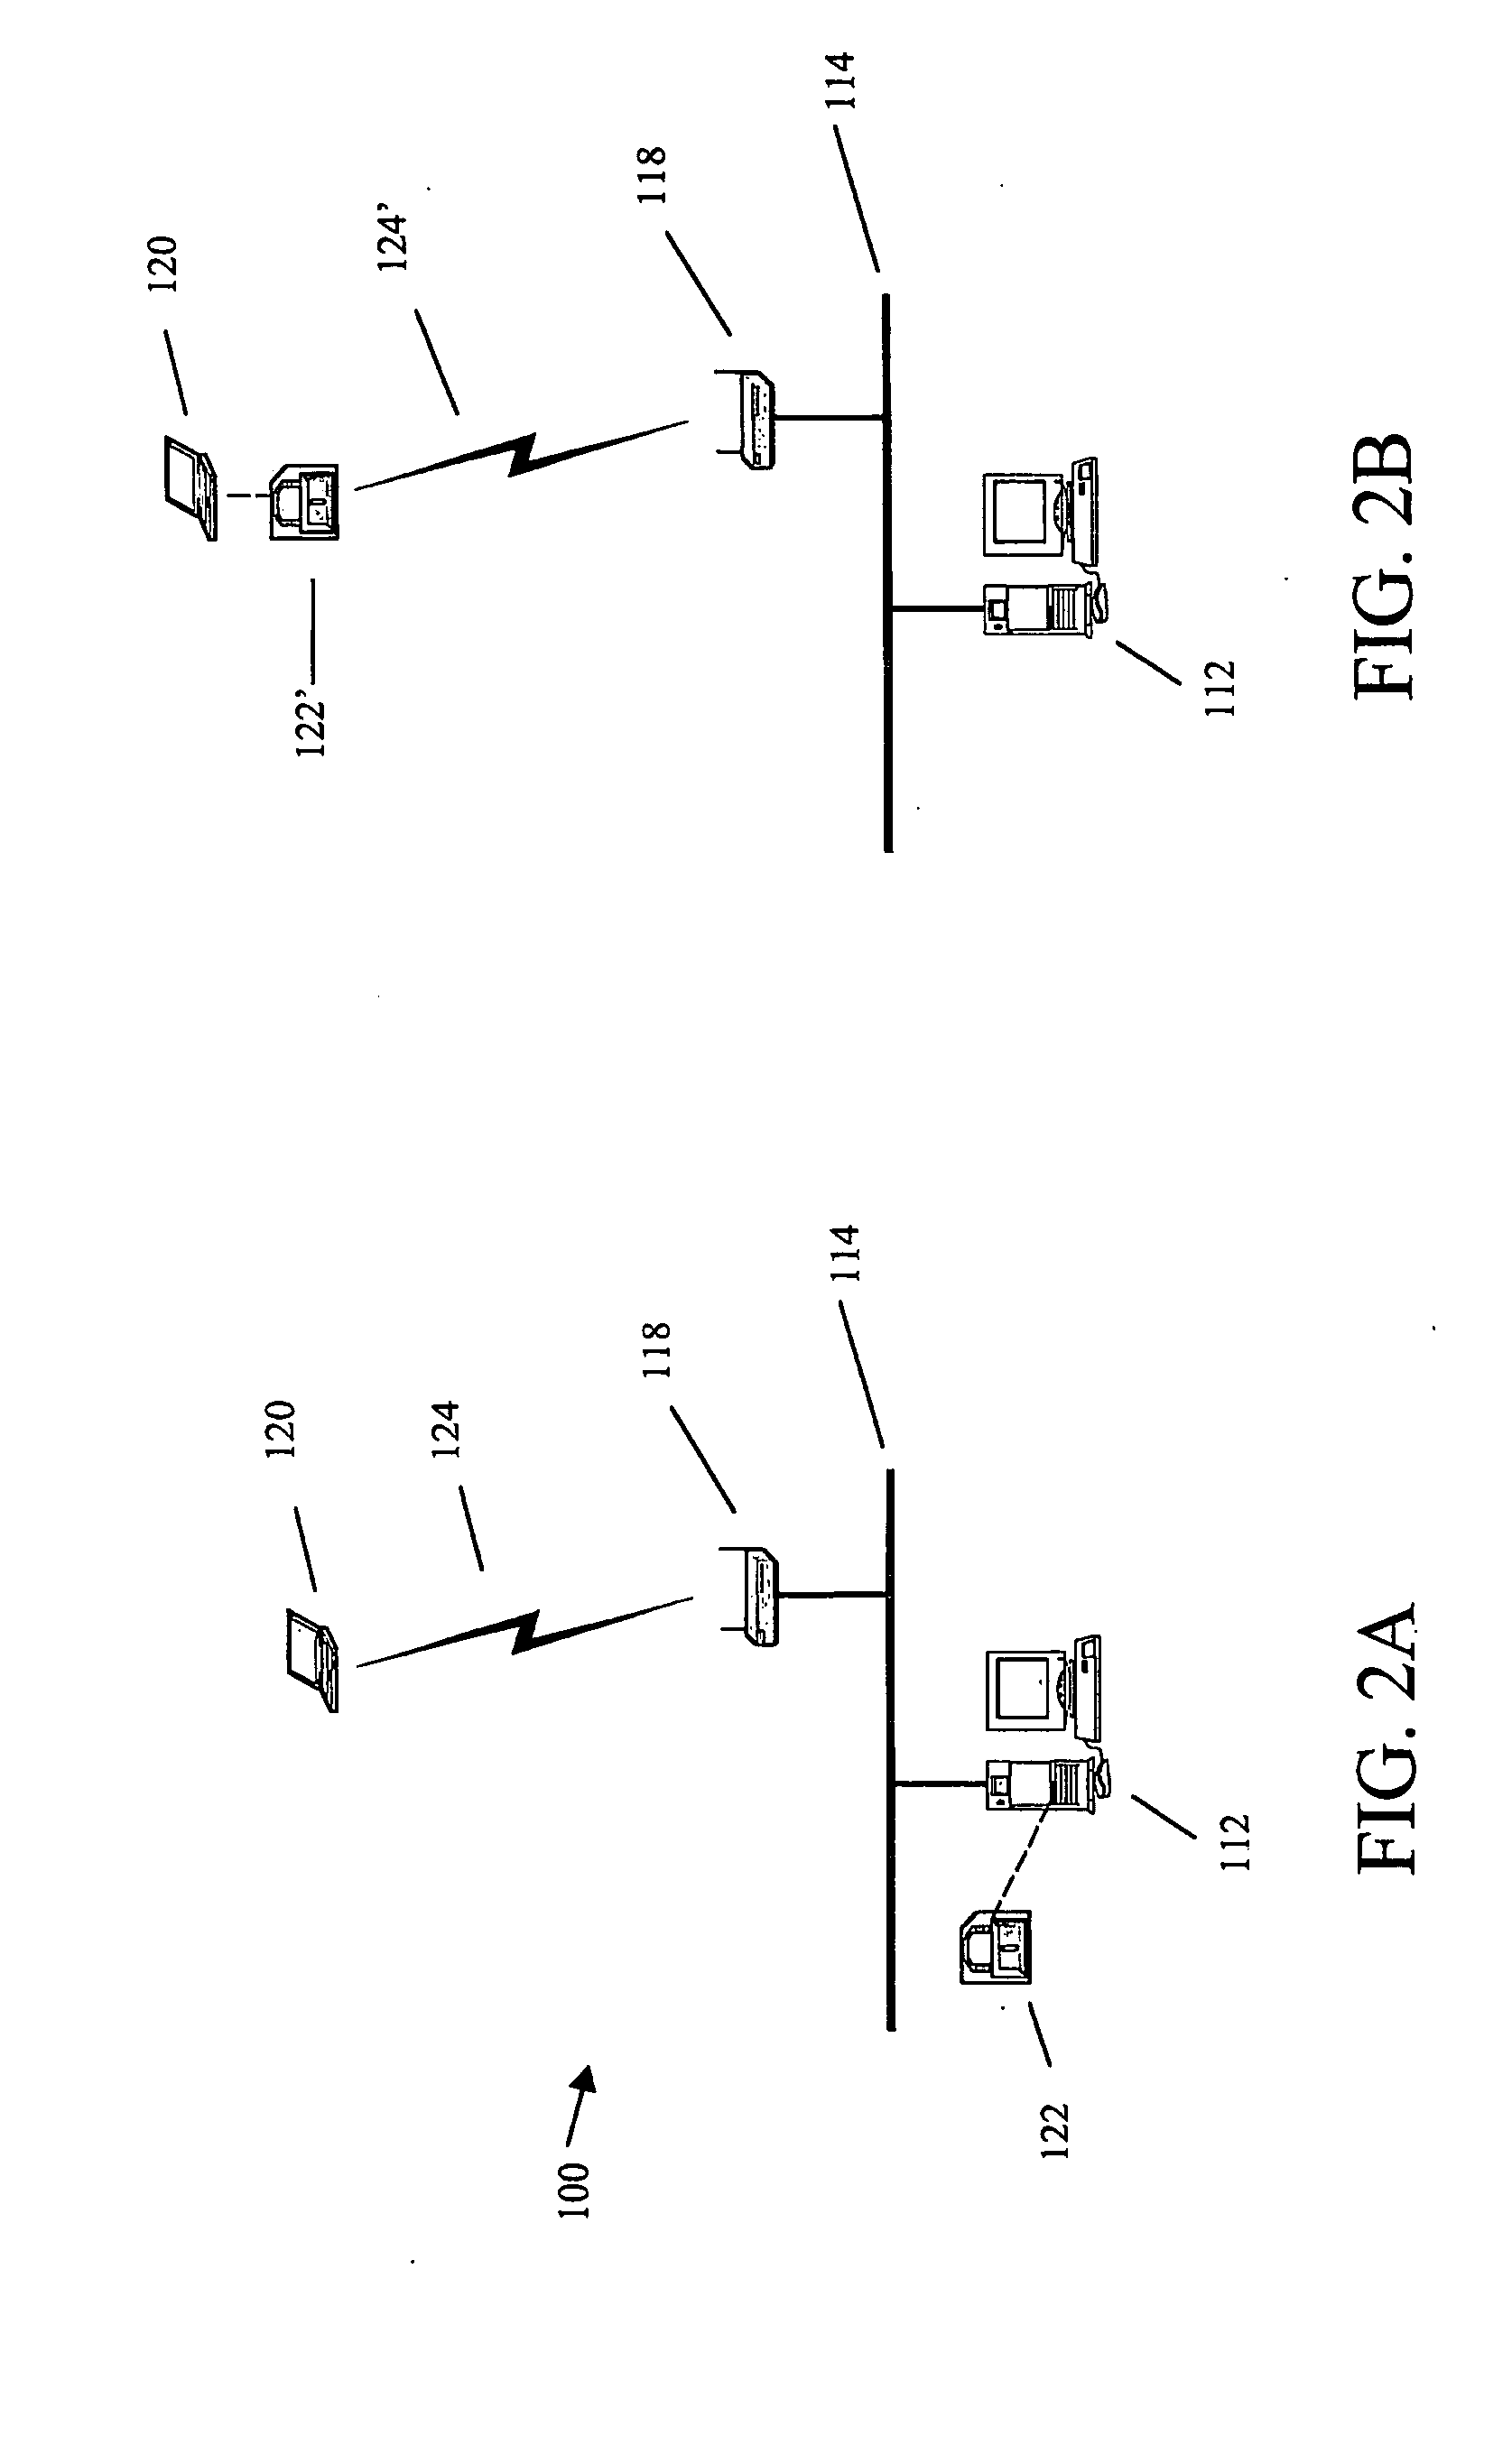 Automated network security system and method